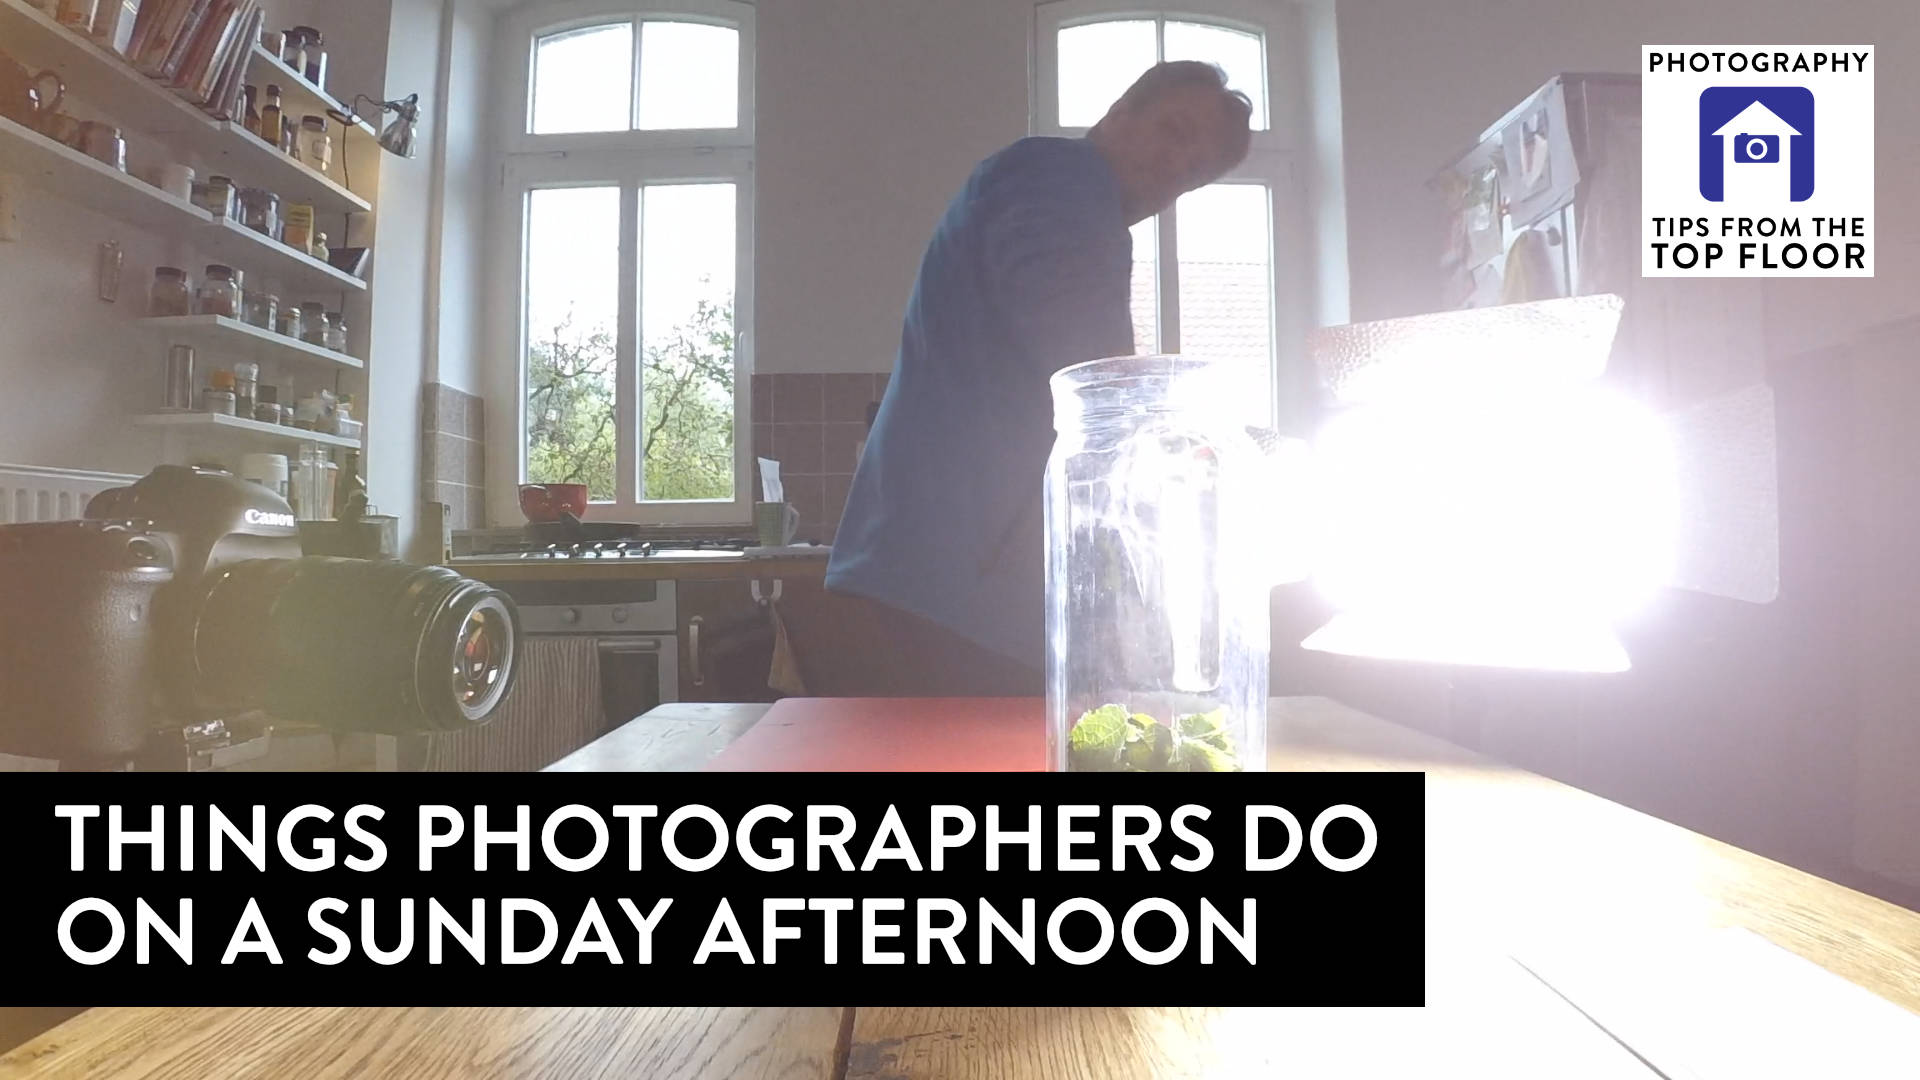 Things photographers do on a Sunday afternoon